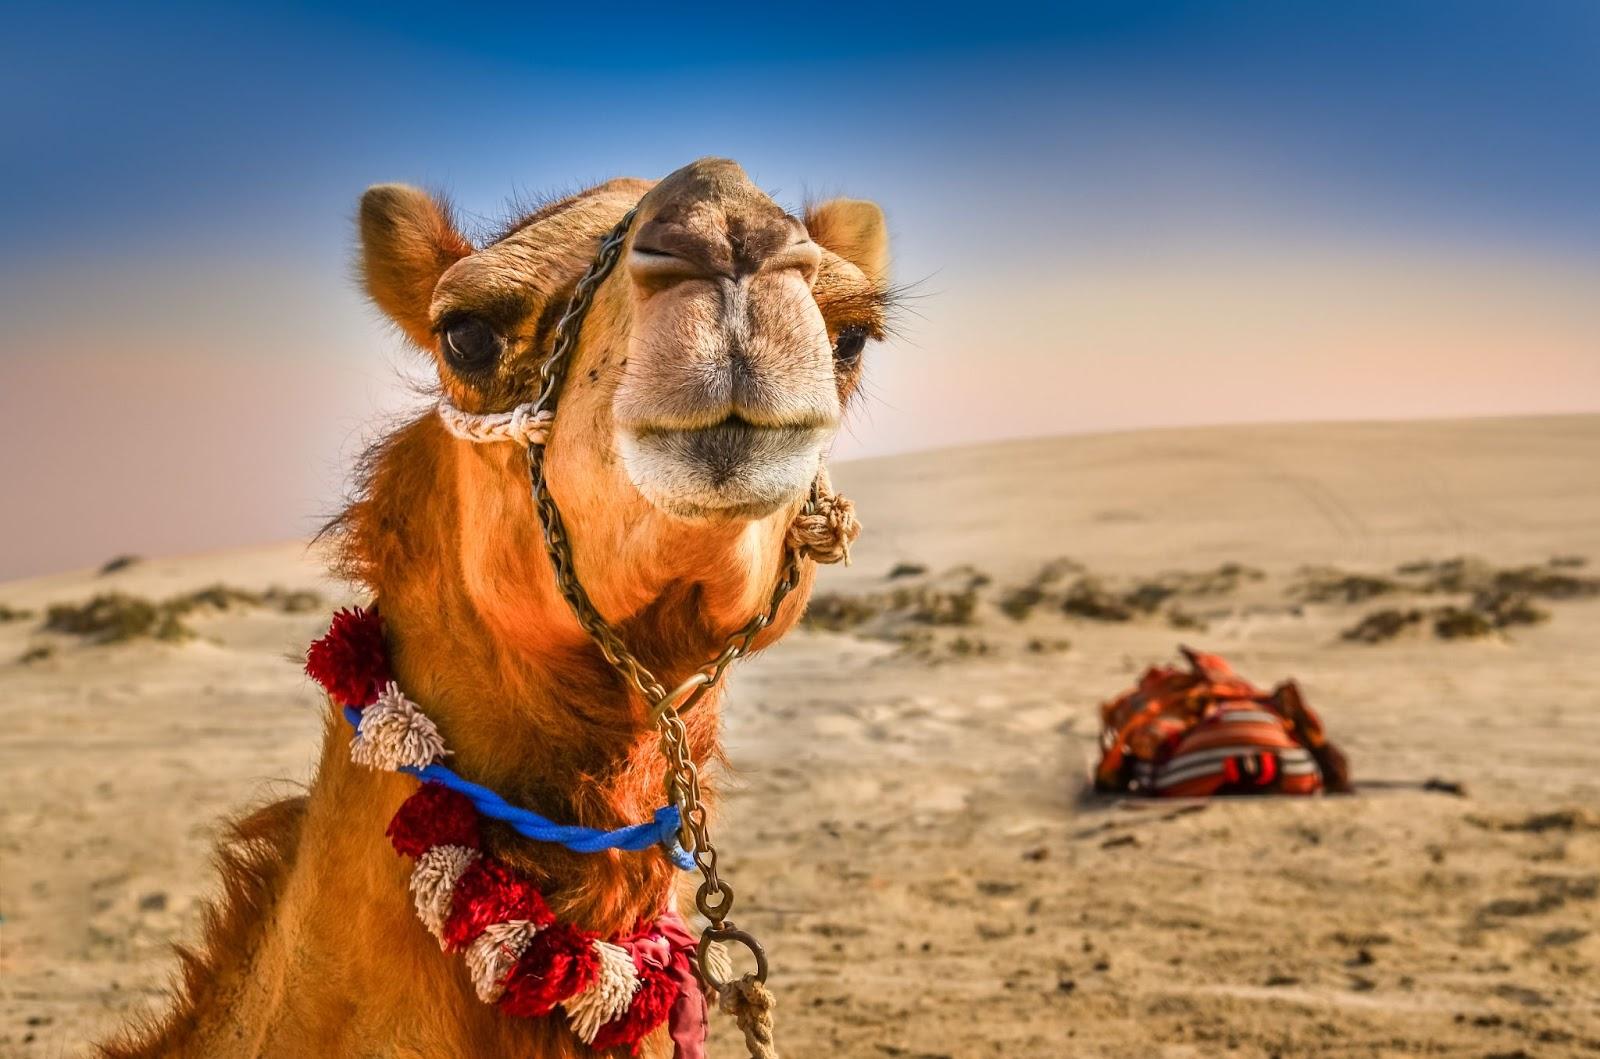 Detail of camel's head in the desert with funny expression Dubai UAE